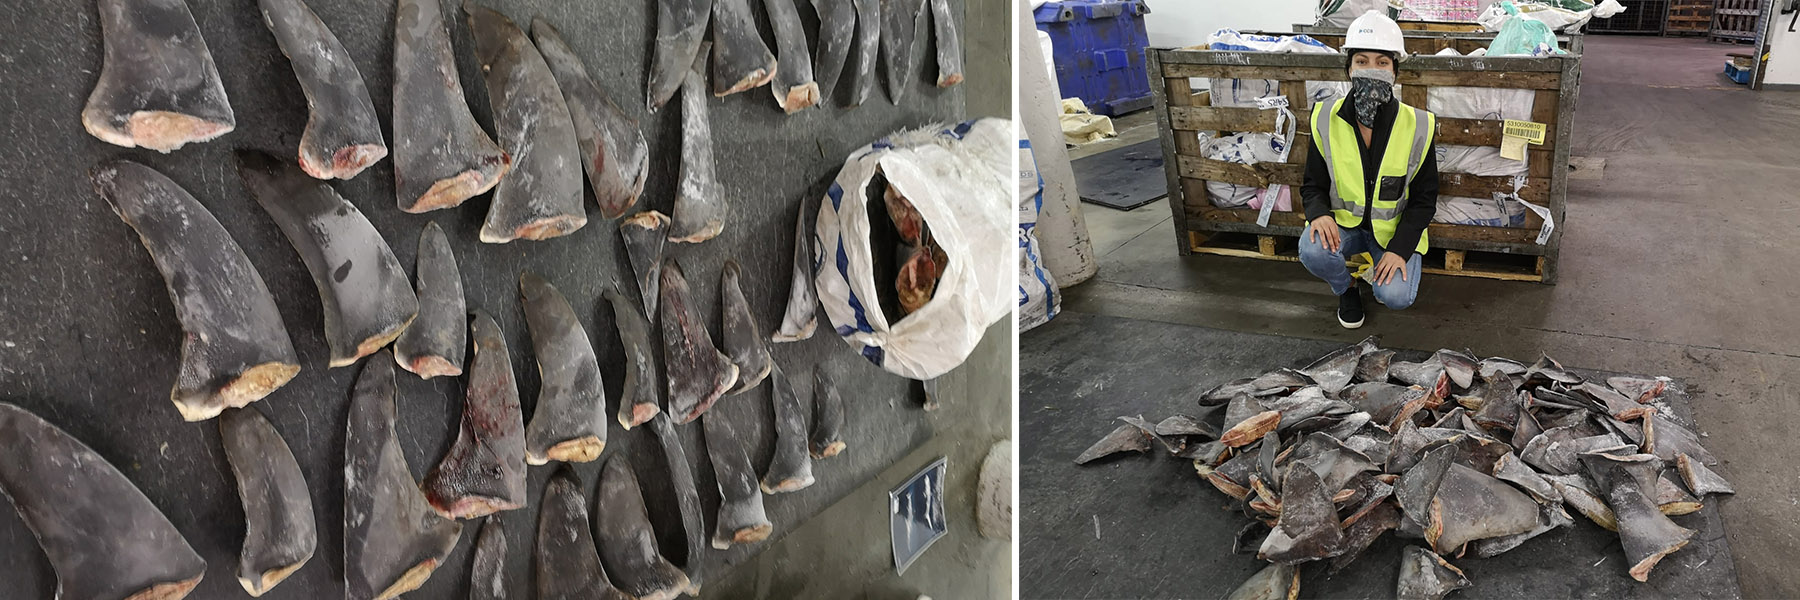 Simone Louw, TRAFFIC's Project Officer in Cape Town inspects a shark fin seizure concerning CITES-listed species. Photo via Markus Bürgener/TRAFFIC.